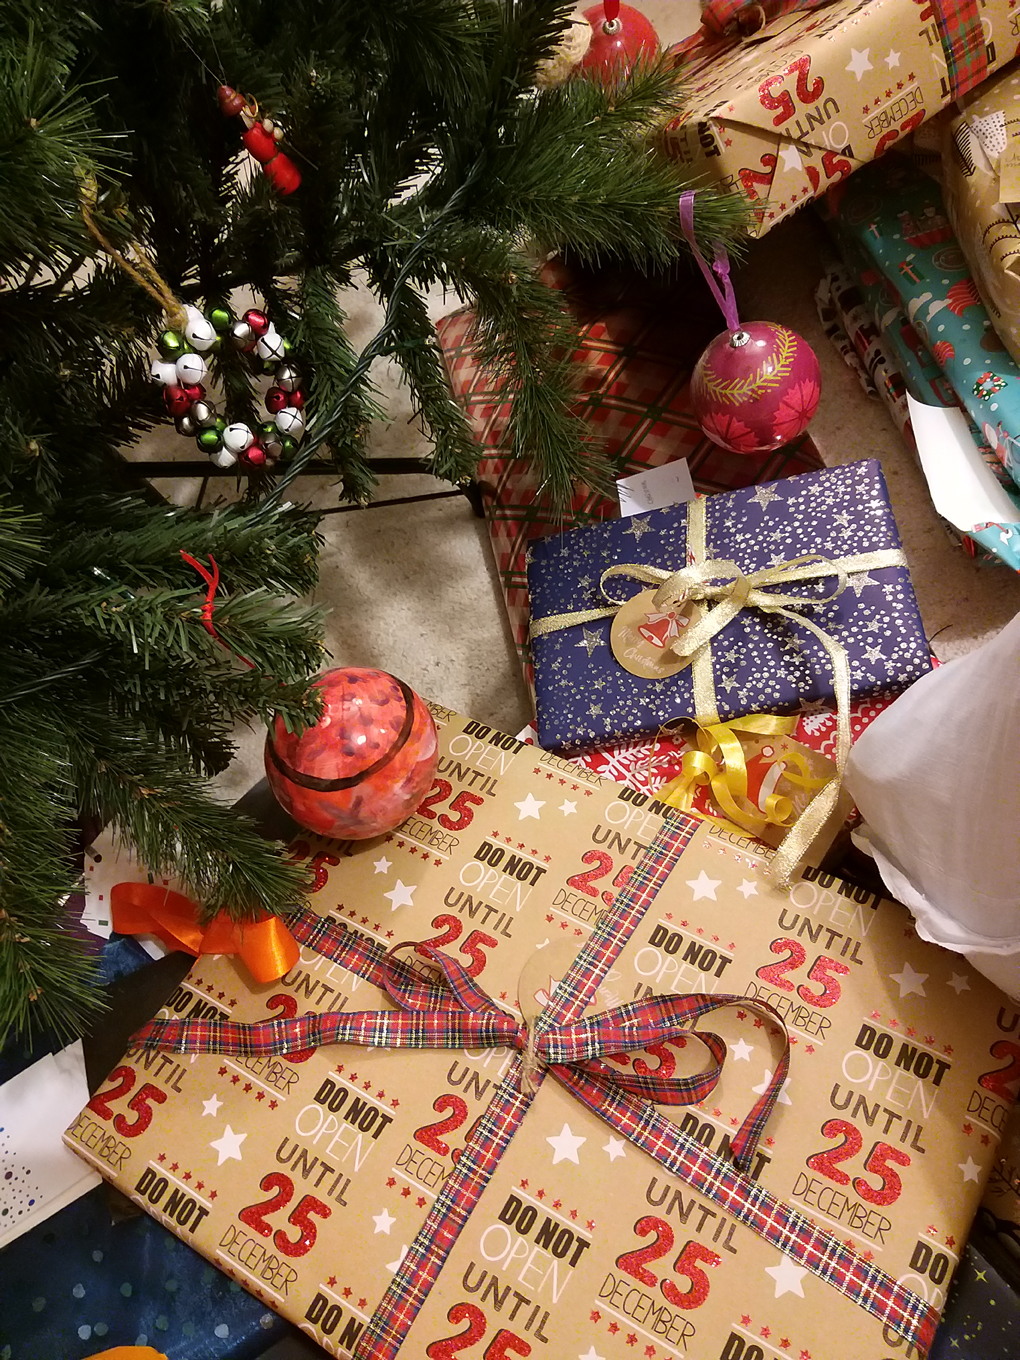 Presents arranged around the bottom of the Christmas tree